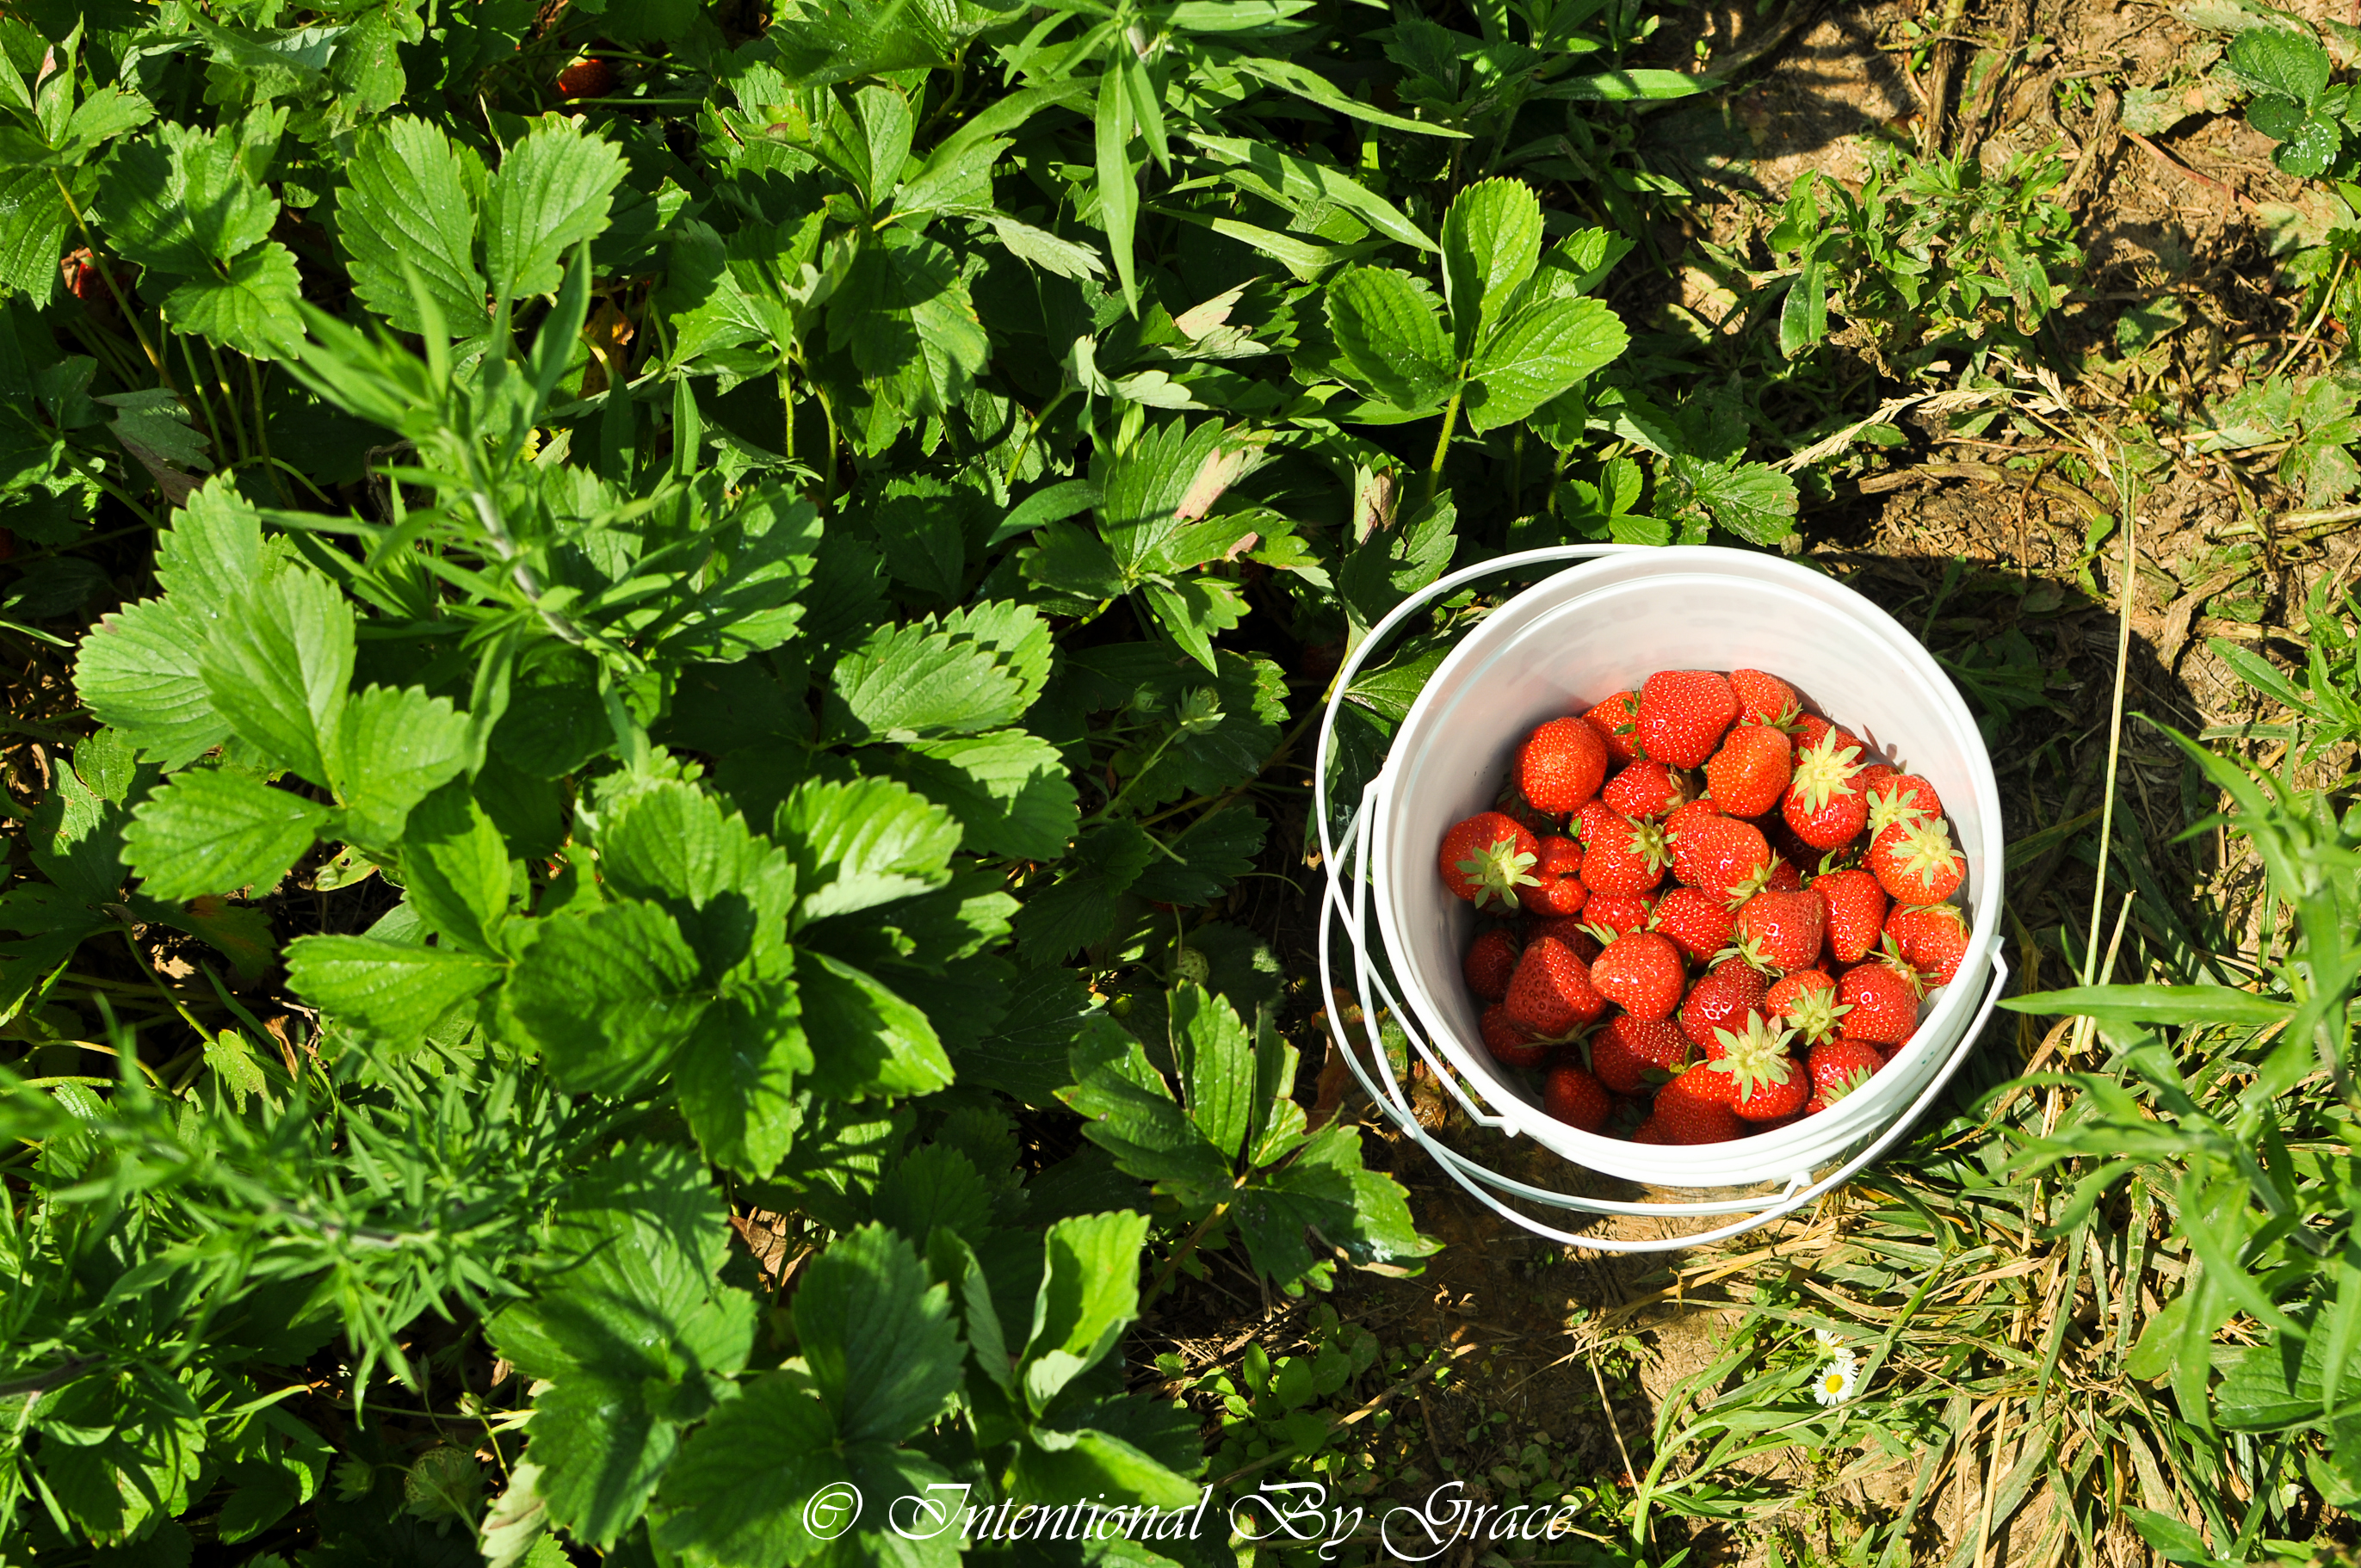 Strawberry Picking Season - We Have Strawberries Coming Out of Our ...